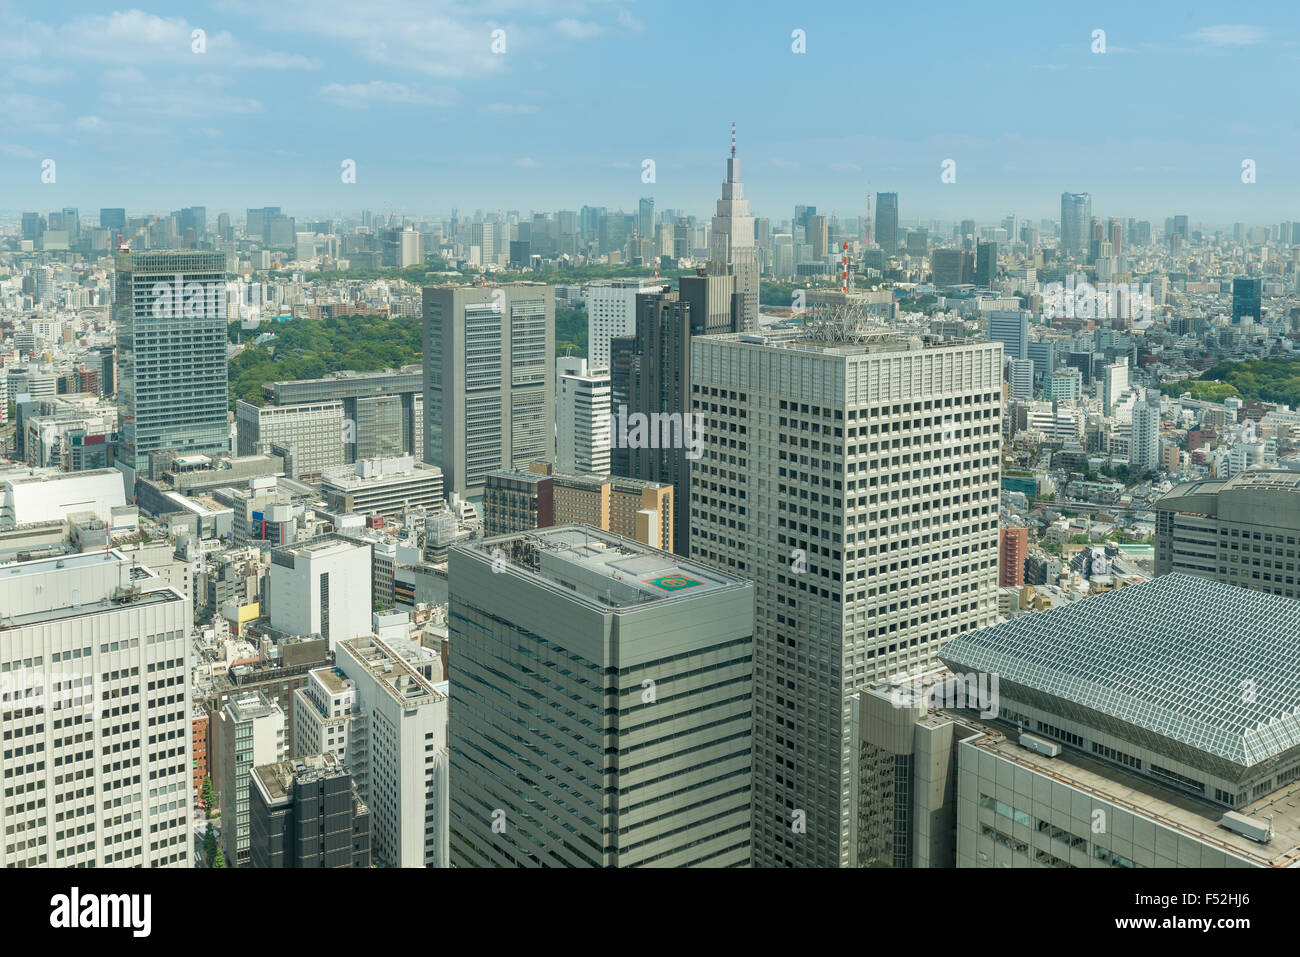 Cityscape of Tokyo skyscrapers in shinjuku financial district, Japan Stock Photo